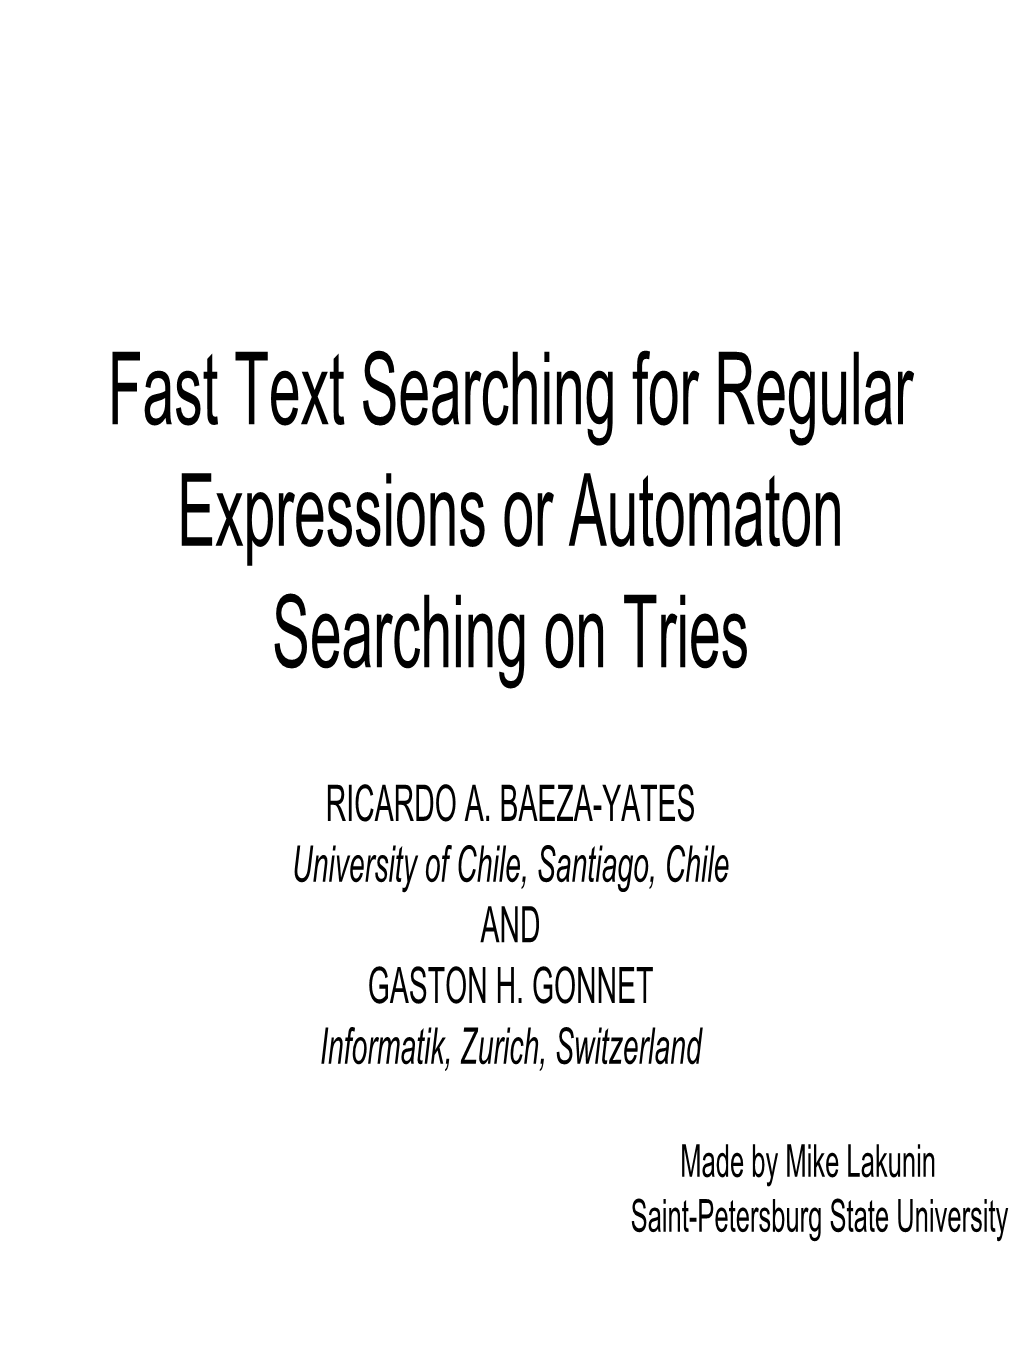 Fast Text Searching for Regular Expressions Or Automaton Searching on Tries